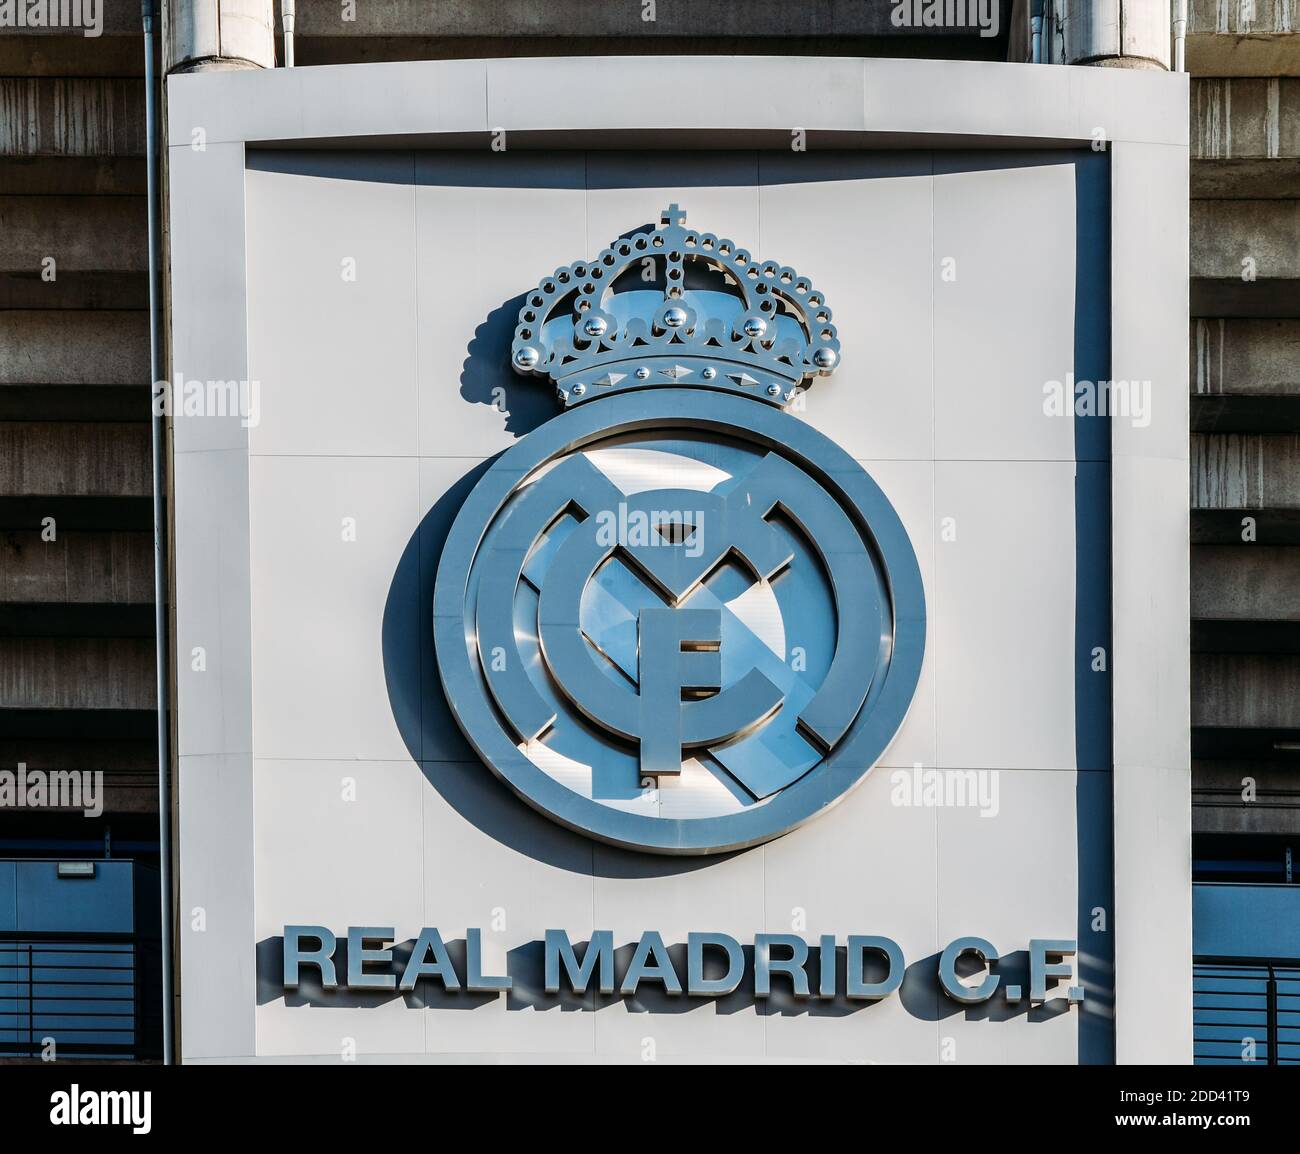 Madrid, Spain - Nov 21, 2020: Real Madrid logo in the facade of the Santiago Bernabeu Stadium. Logotype of Real Madrid is one of the most popular in S Stock Photo